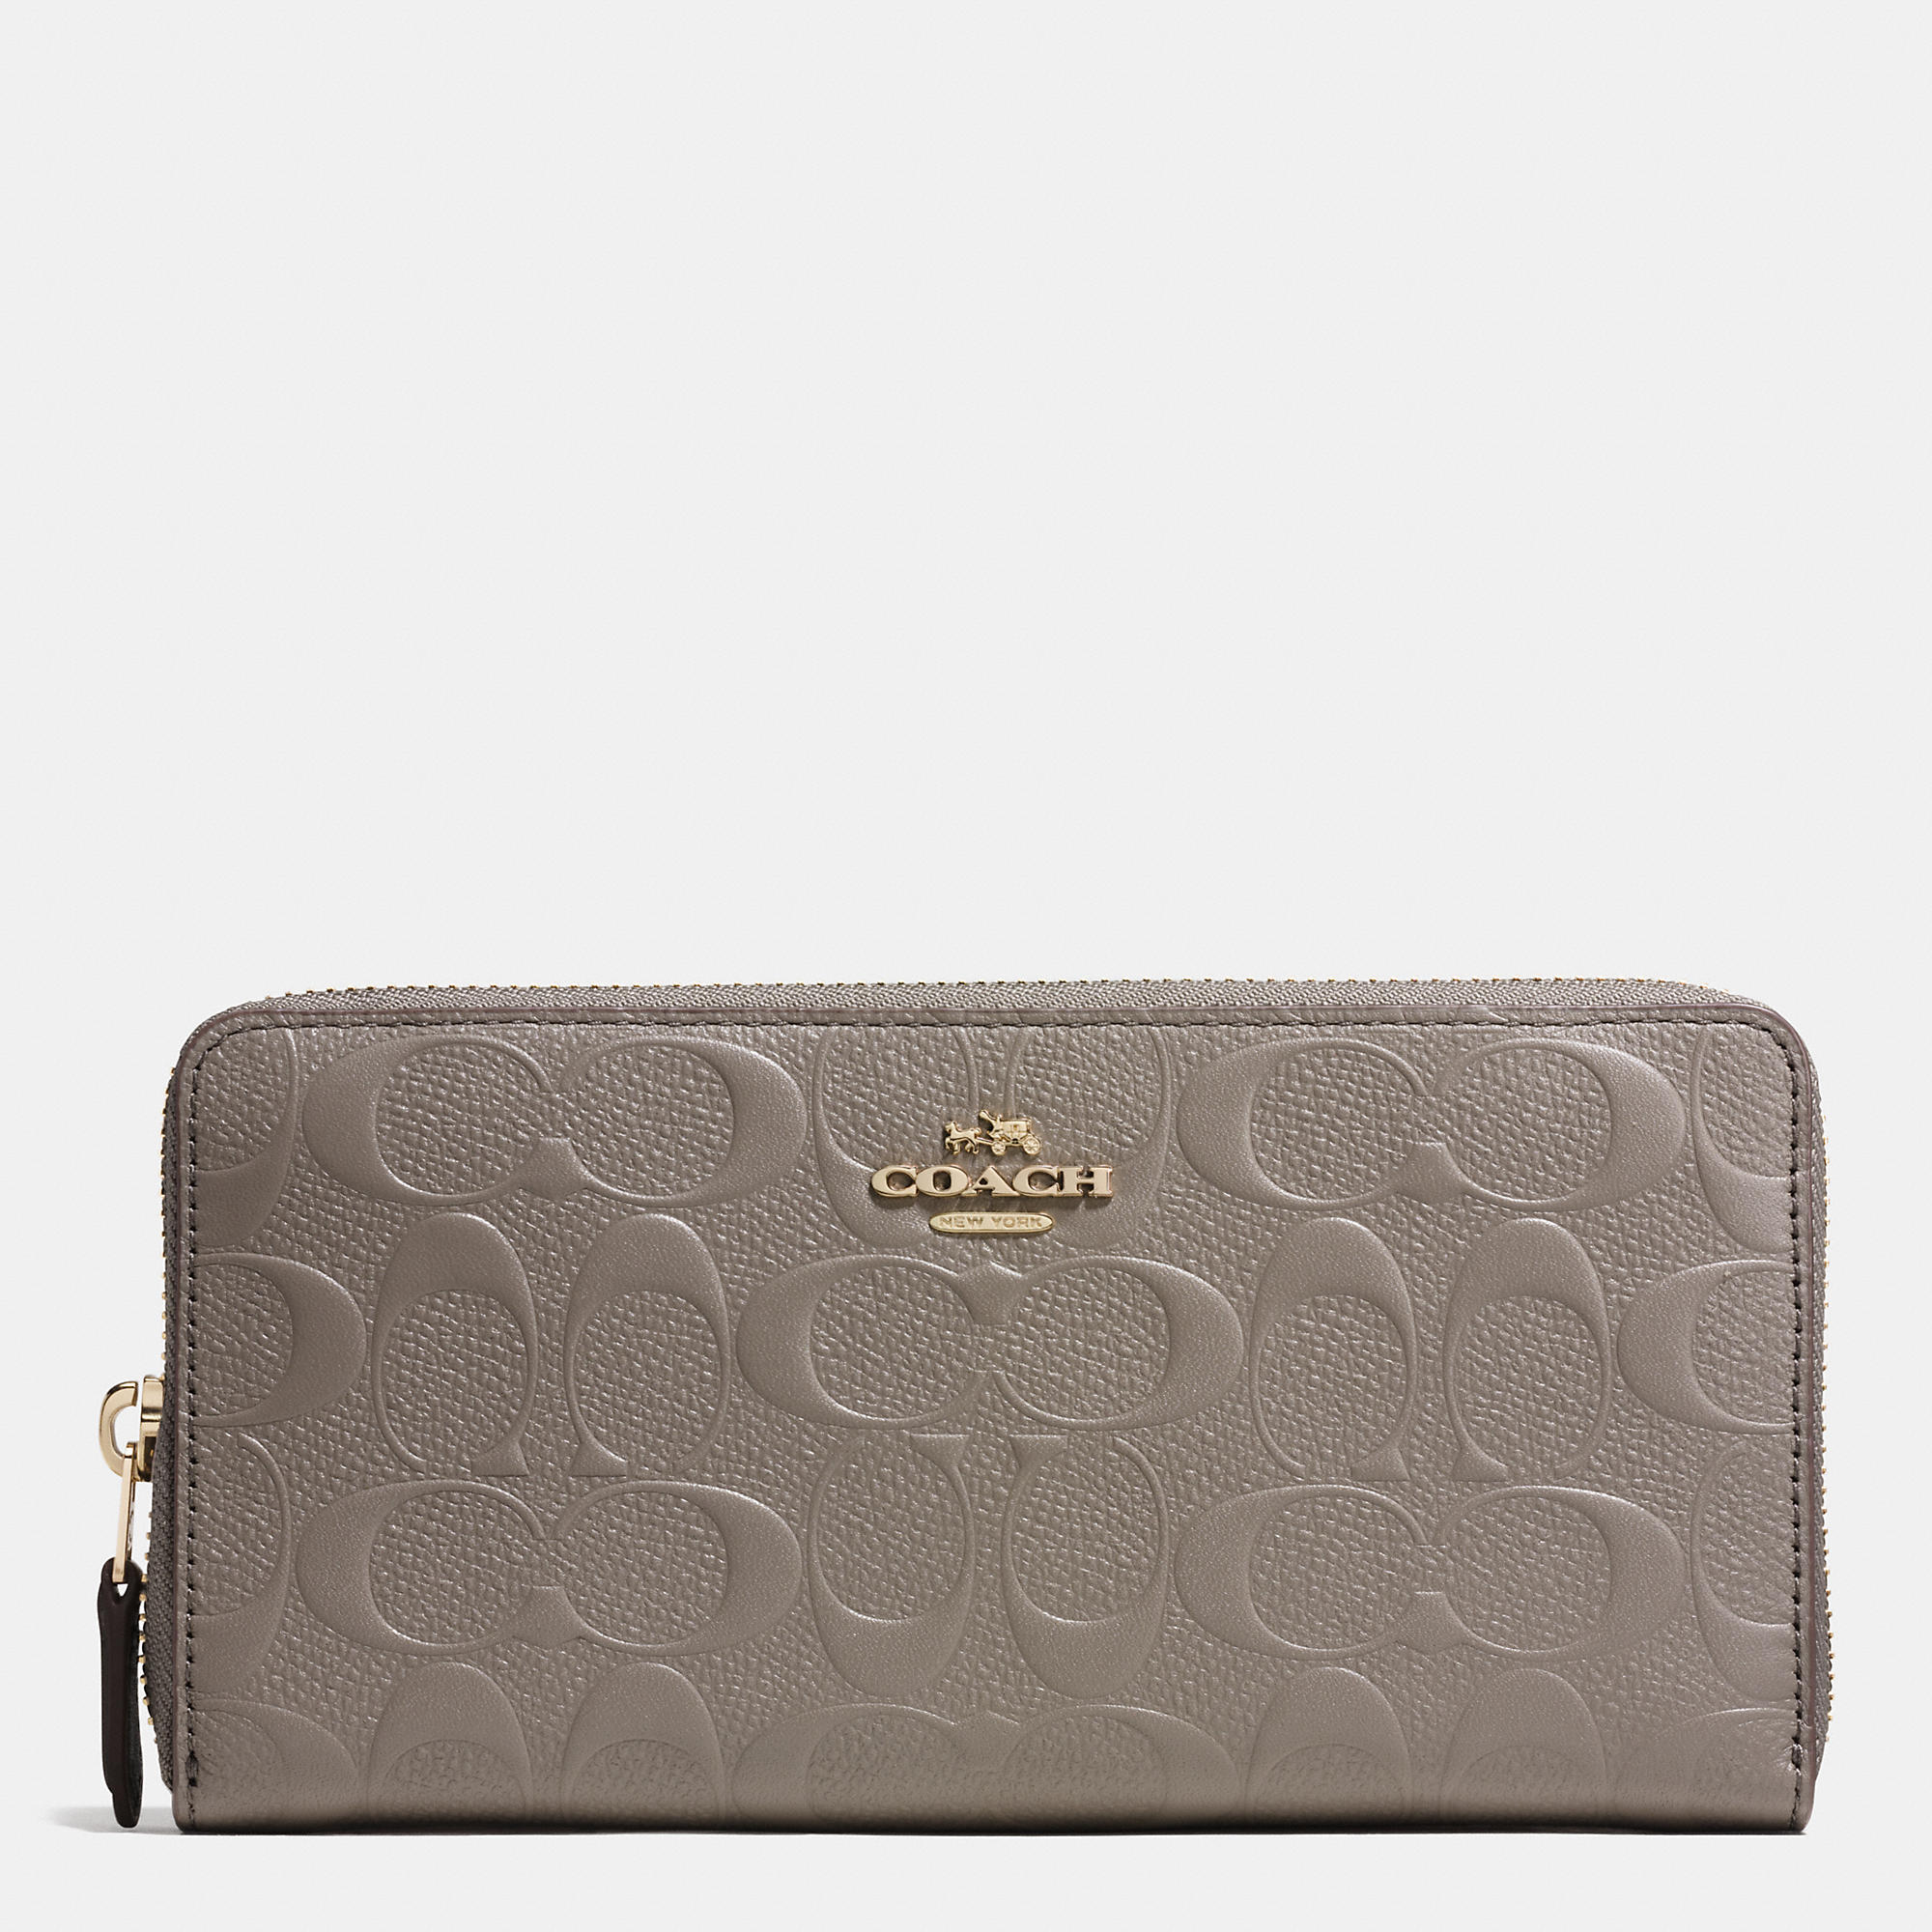 Famous Brand Coach Accordion Zip Wallet In Signature Embossed Leather | Coach Outlet Canada